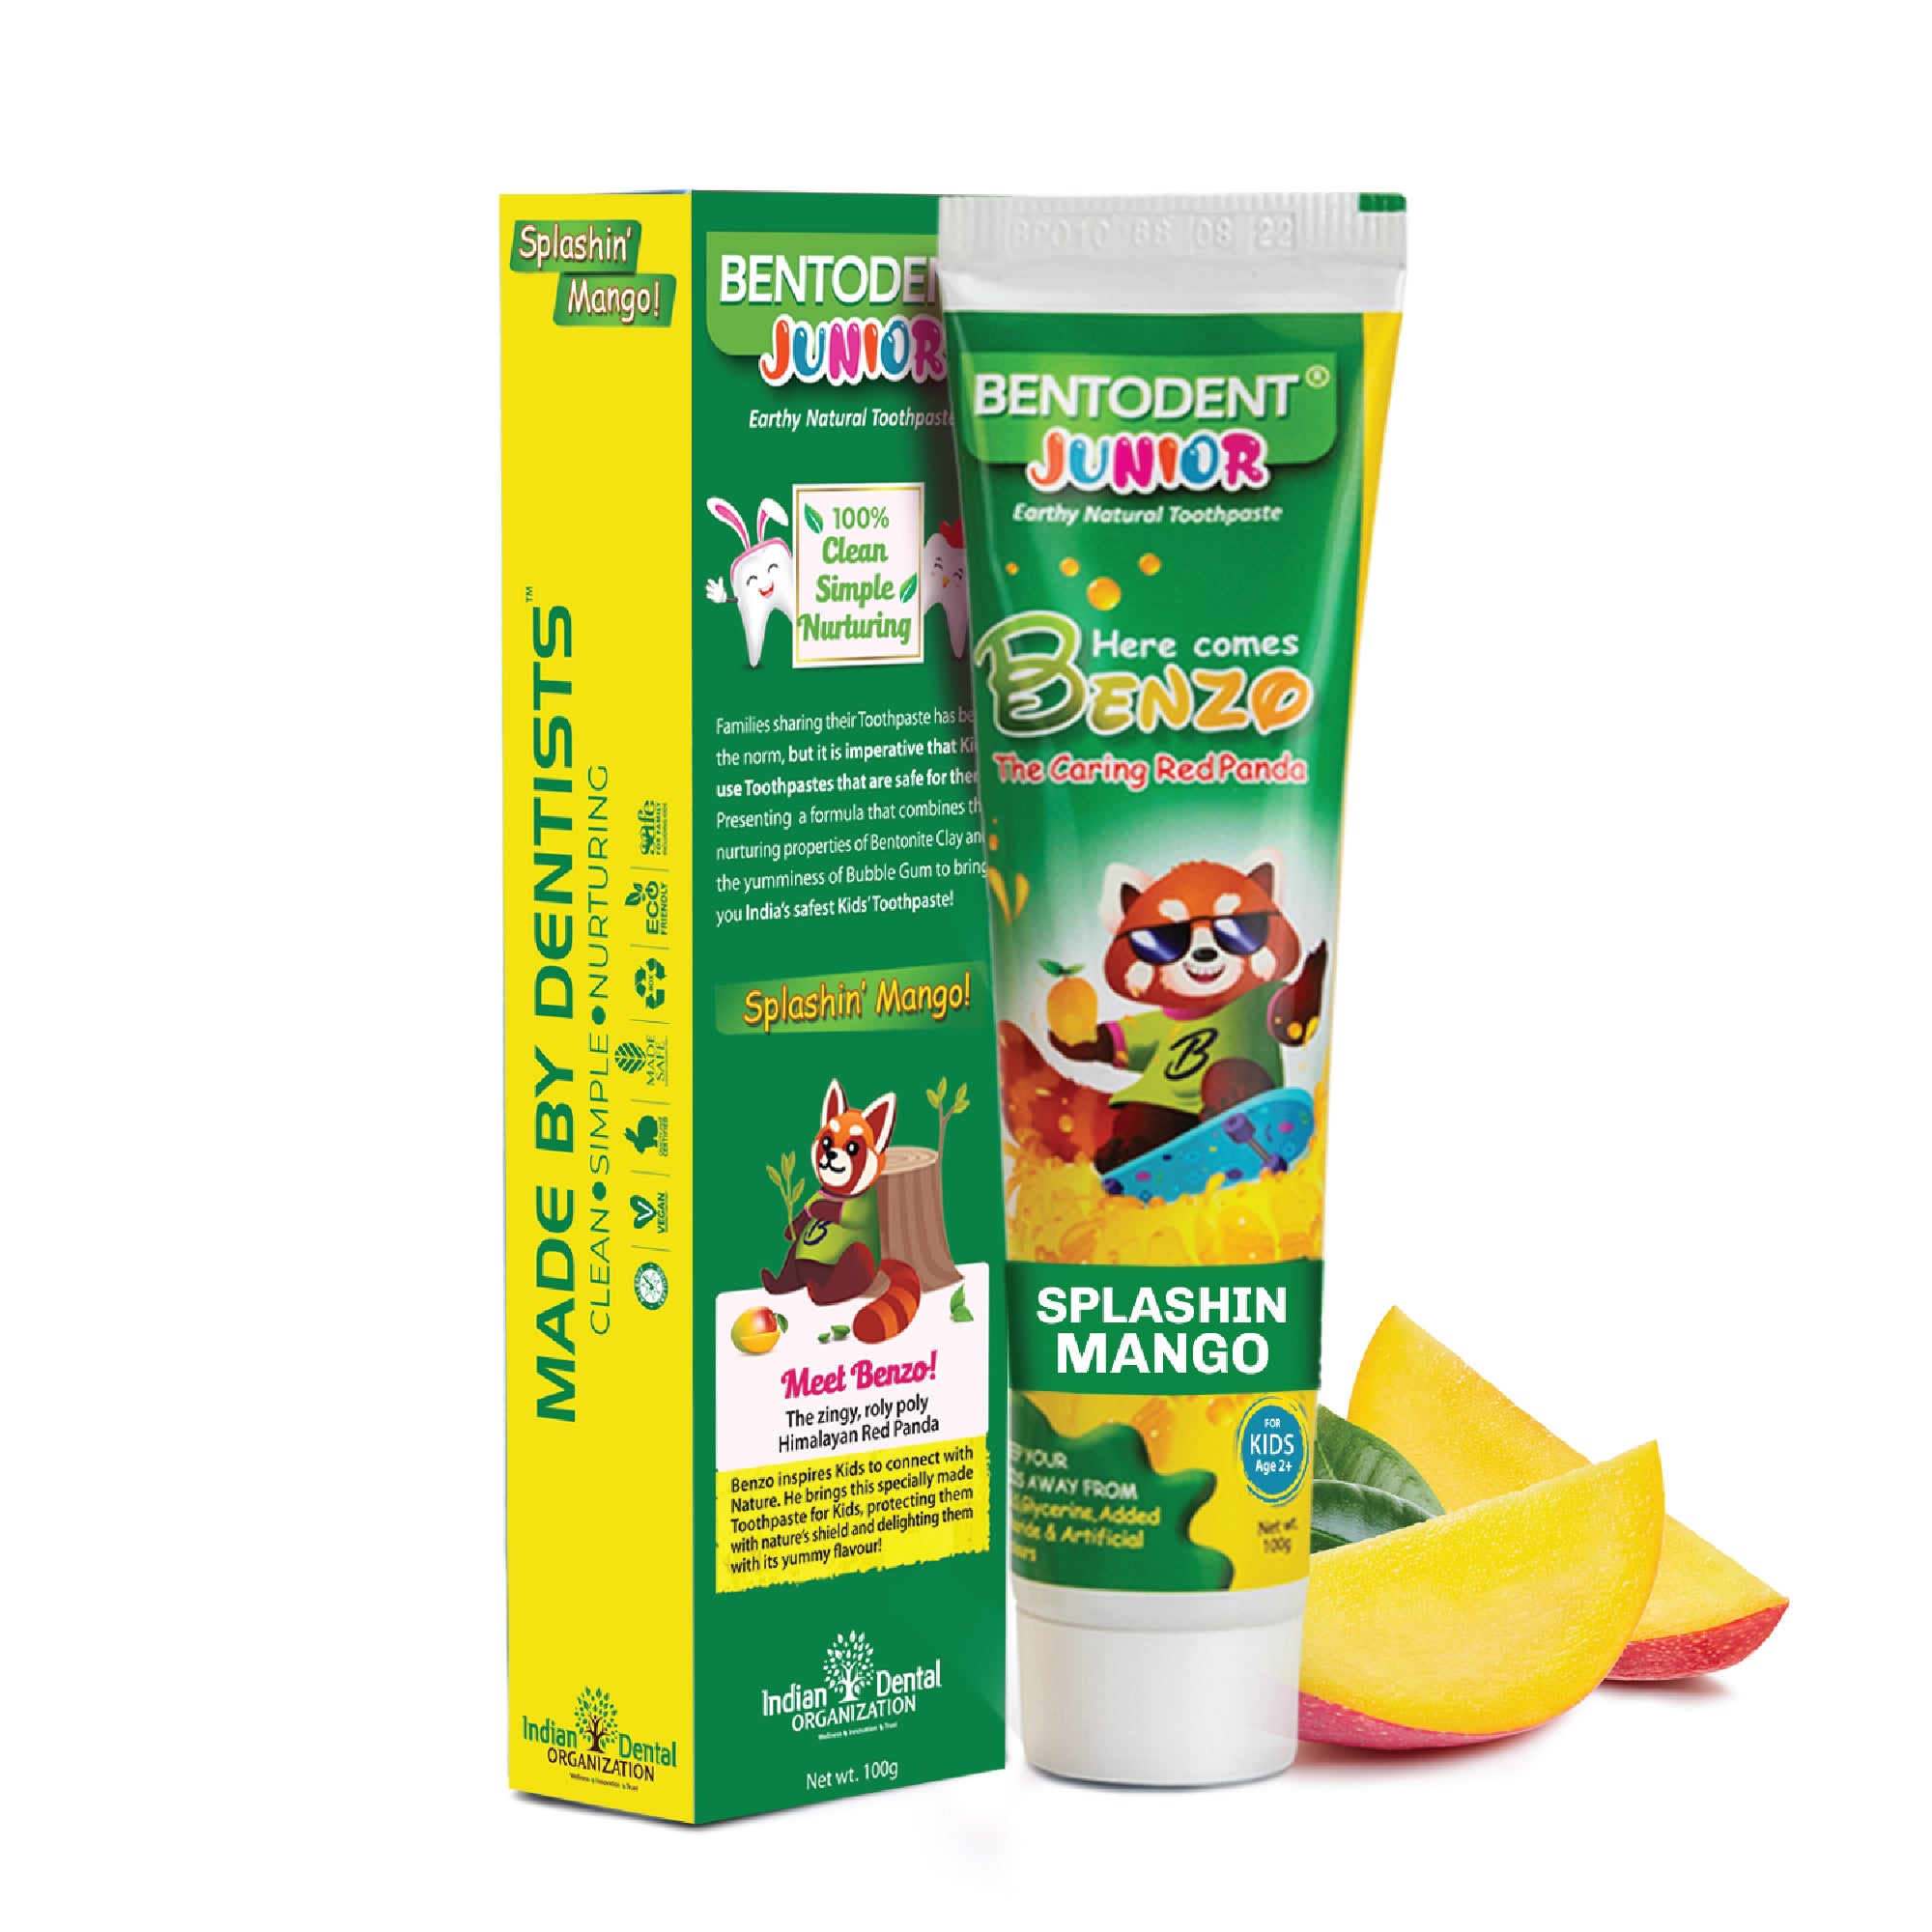 Bentodent 100% Natural Kids Splashin Mango twin Toothpaste, Fluoride Free,  Sls Free, Complete oral care protection for kids, Fresh Breath, Best toothpaste for kids 2+ years 100g  each - Indian Dental Organization